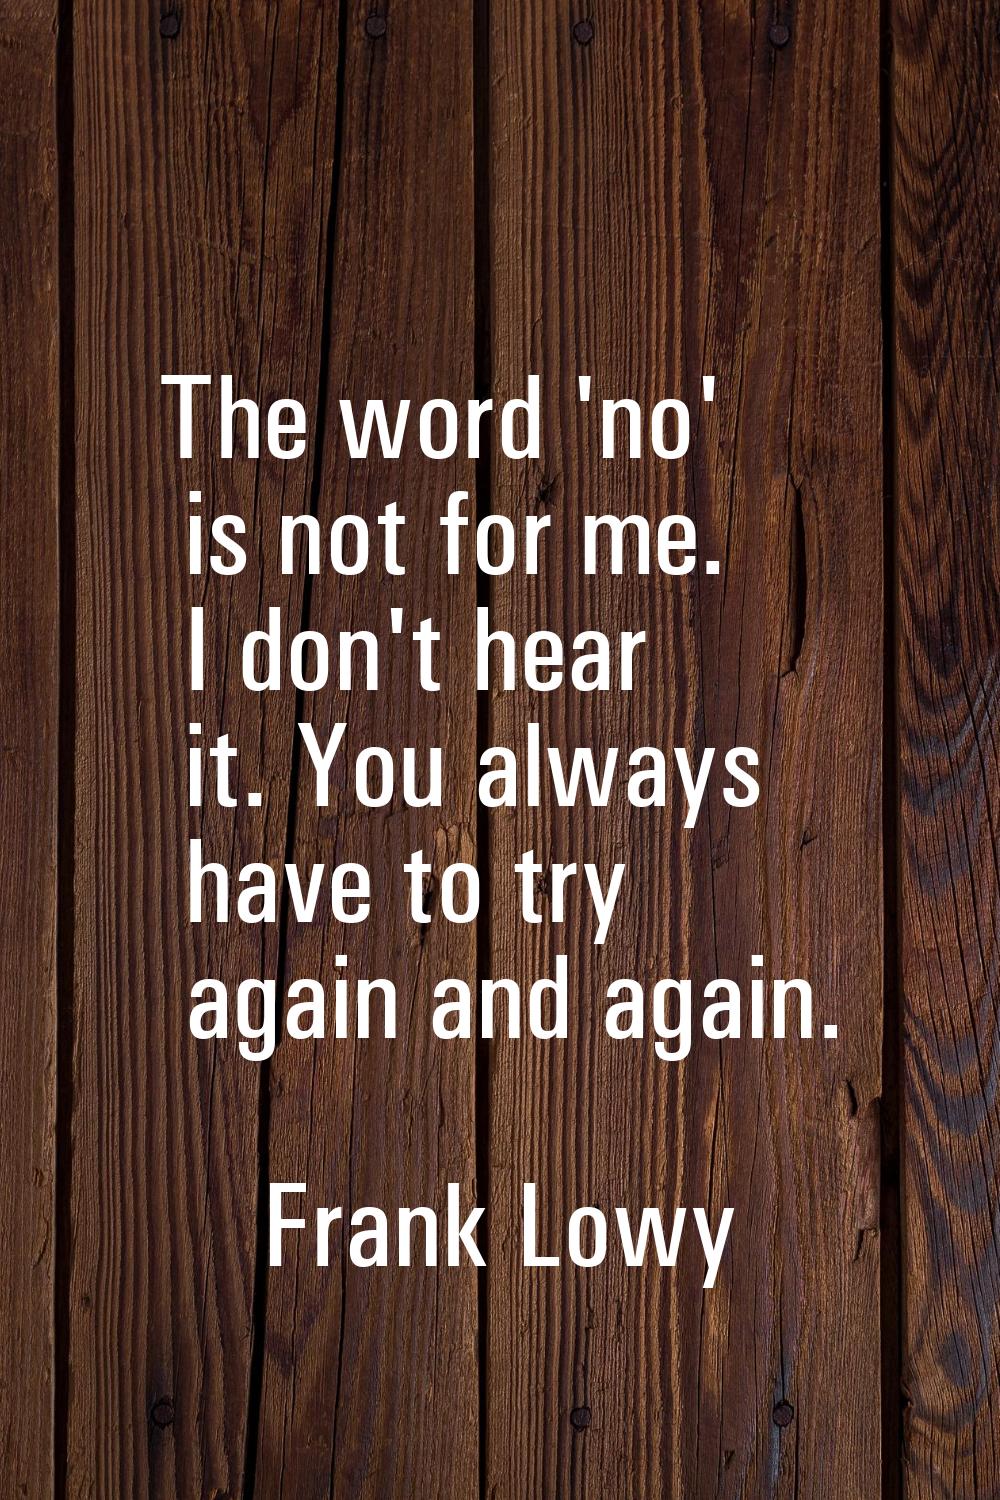 The word 'no' is not for me. I don't hear it. You always have to try again and again.